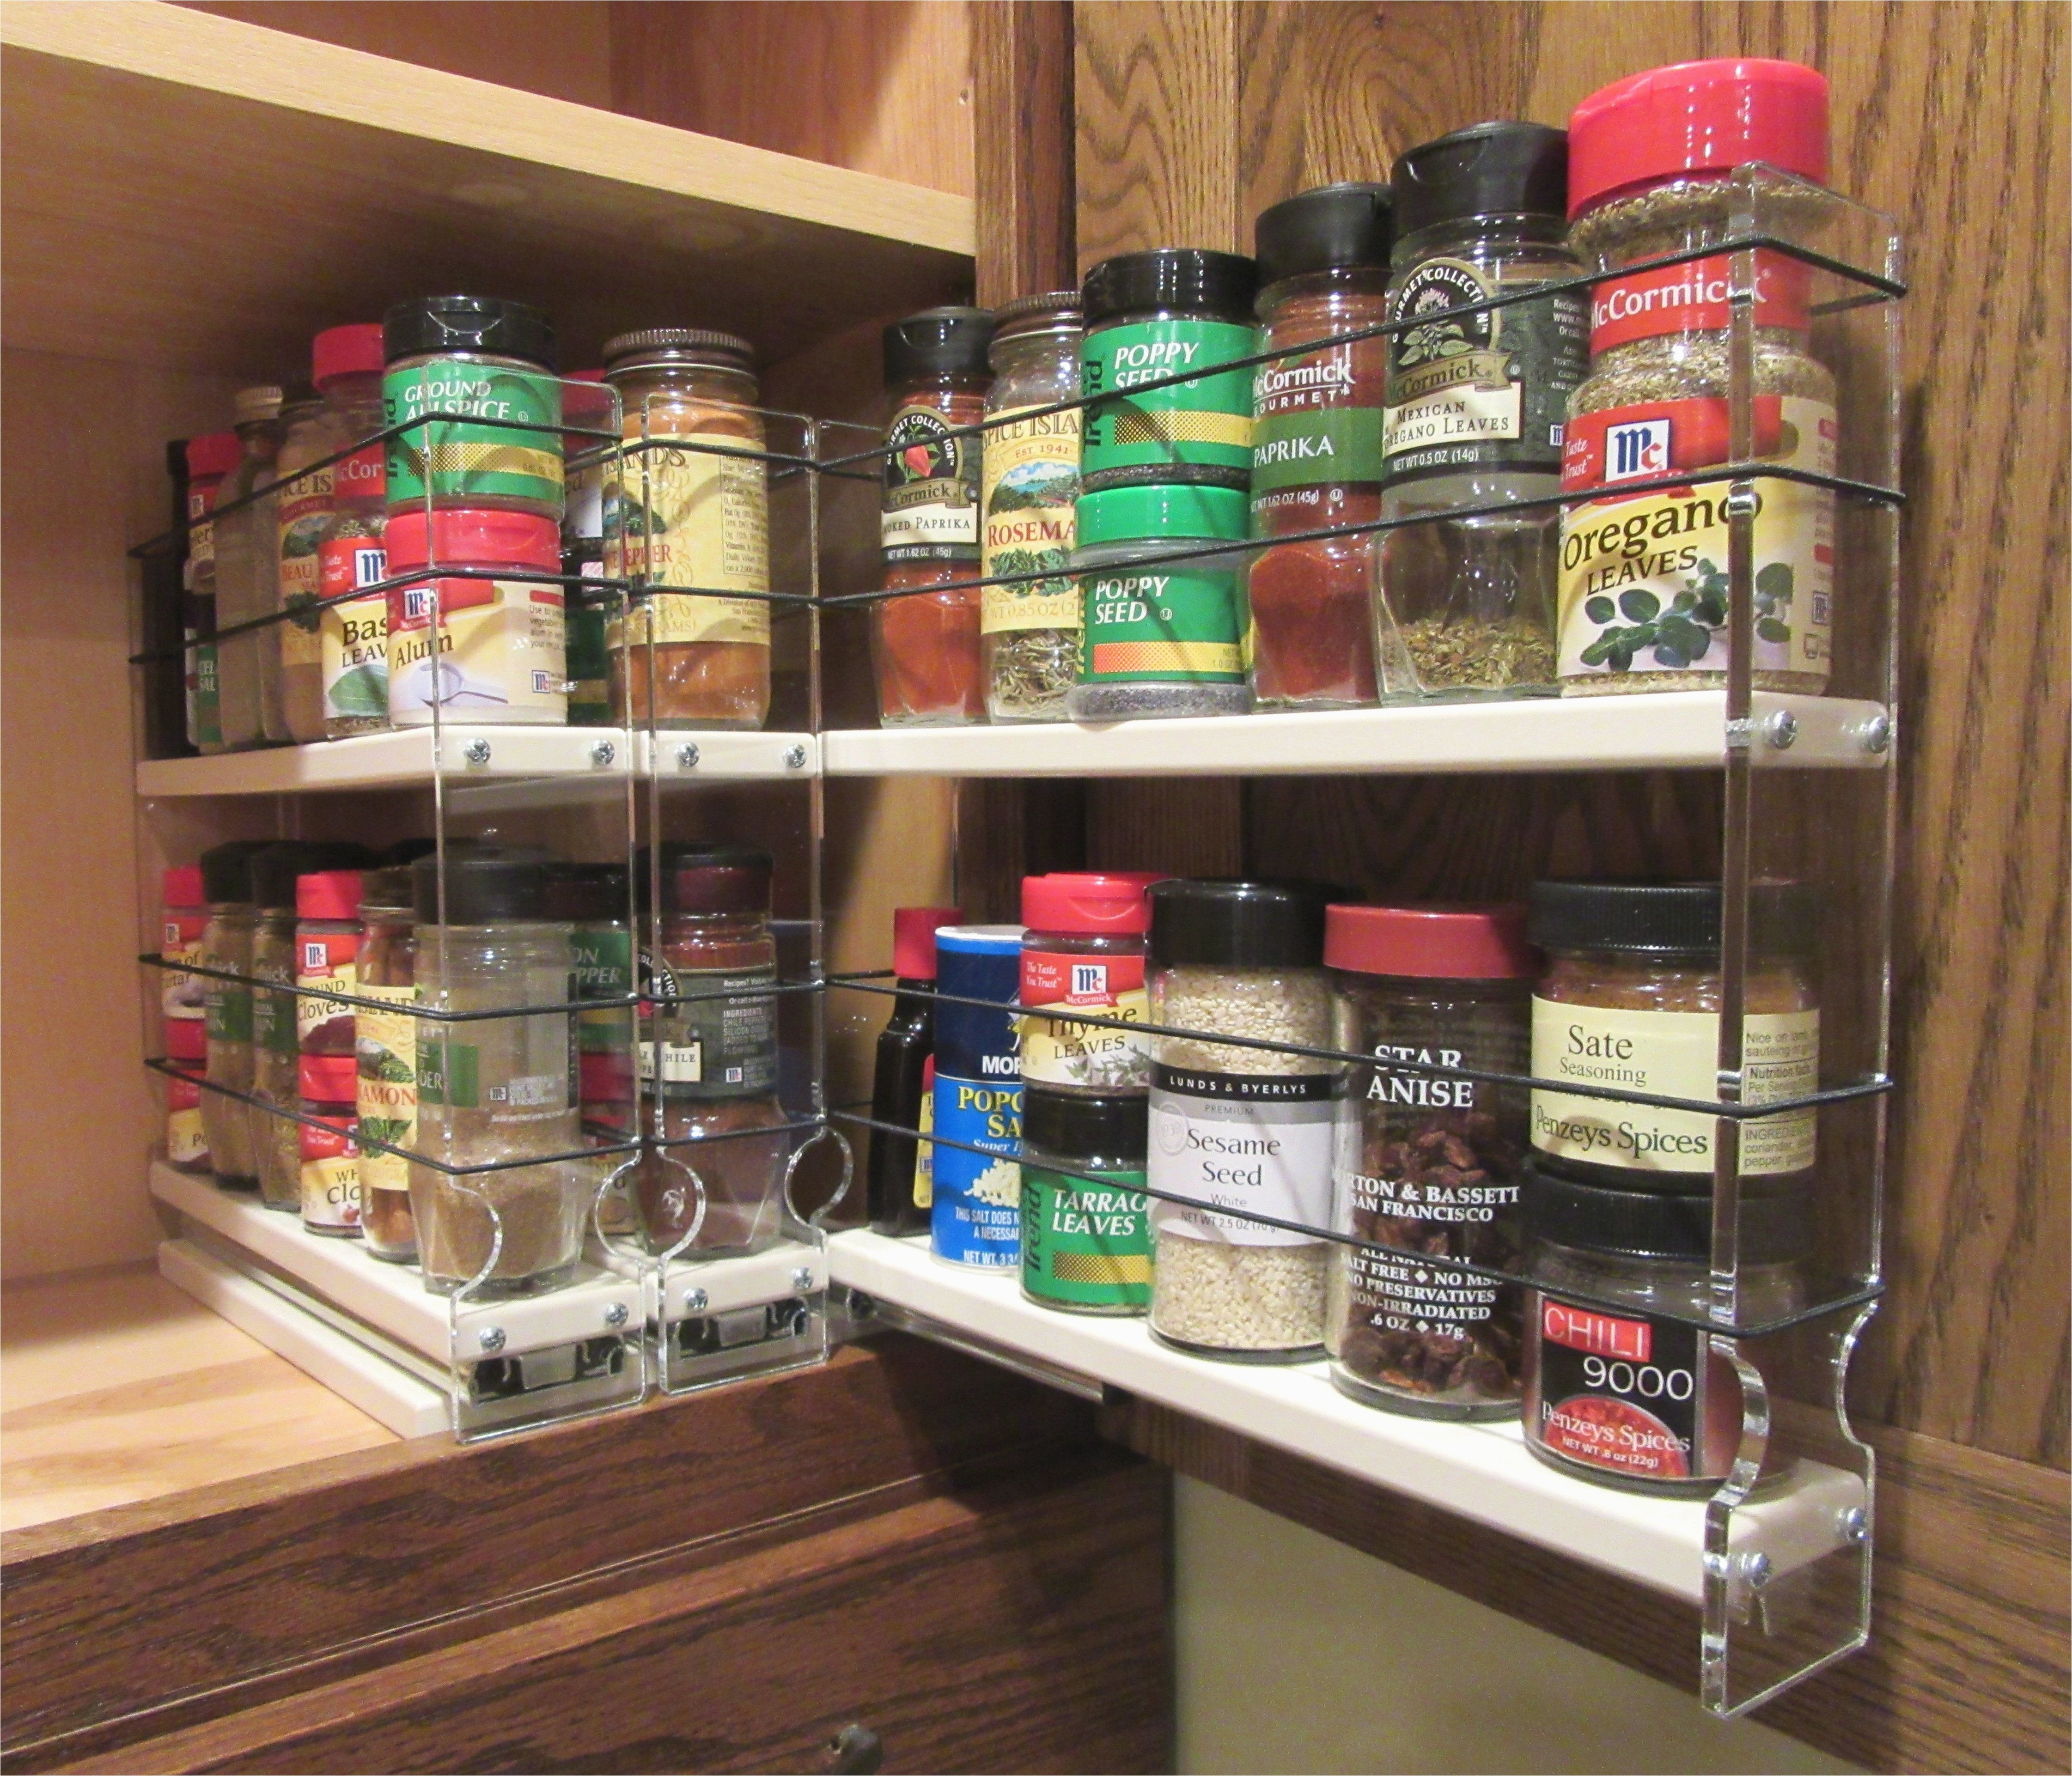 Lowes.ca Spice Rack Kitchen How to organize Spice Cabinet Awesome 20 Spice Rack Ideas